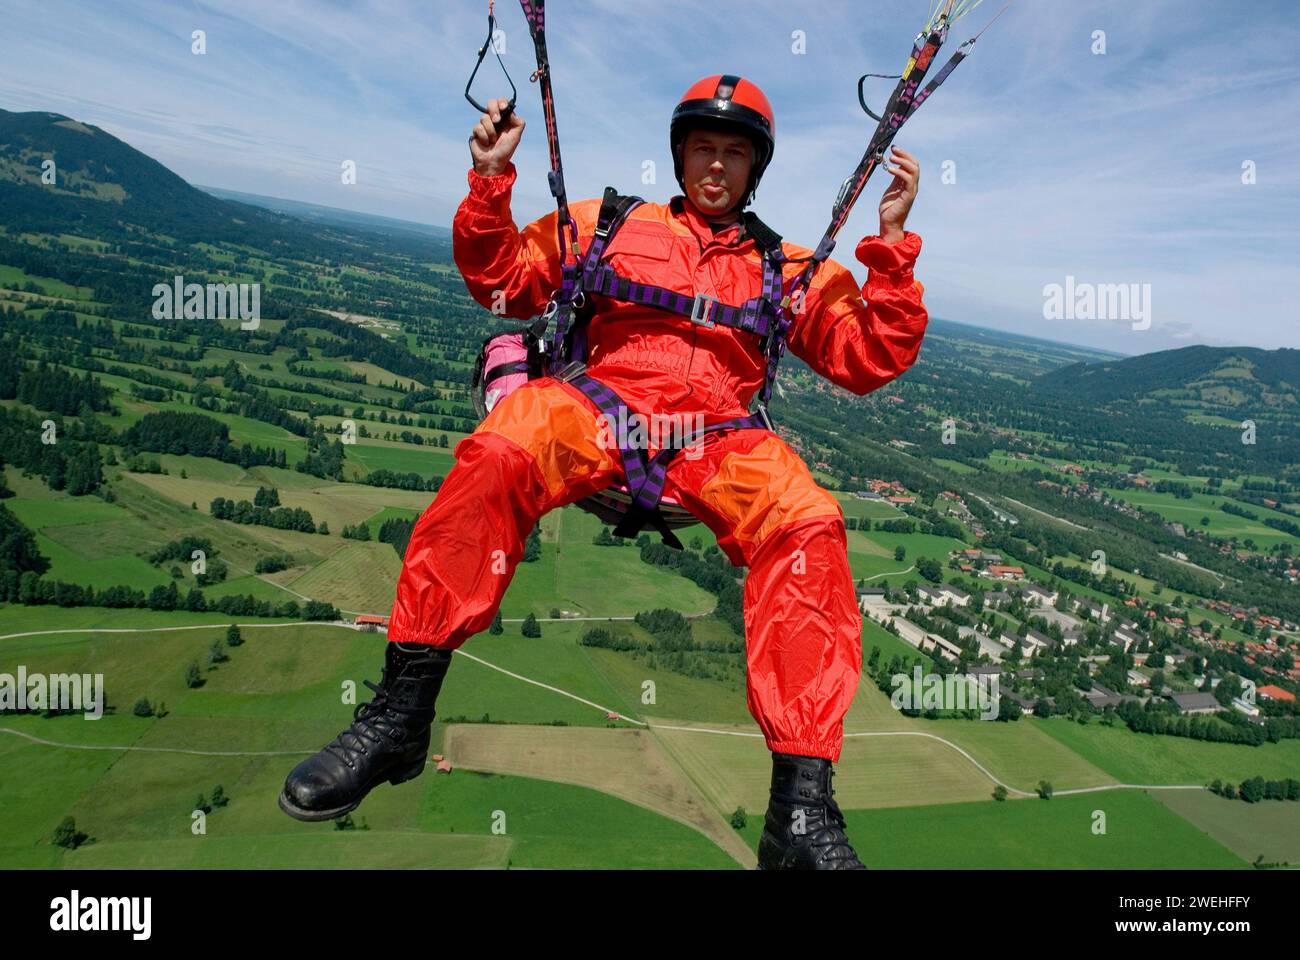 a man in signal red overalls hangs from a paraglider high above the meadows near Lenggries, pilot's perspective, Bavaria, Germany, Europe Stock Photo